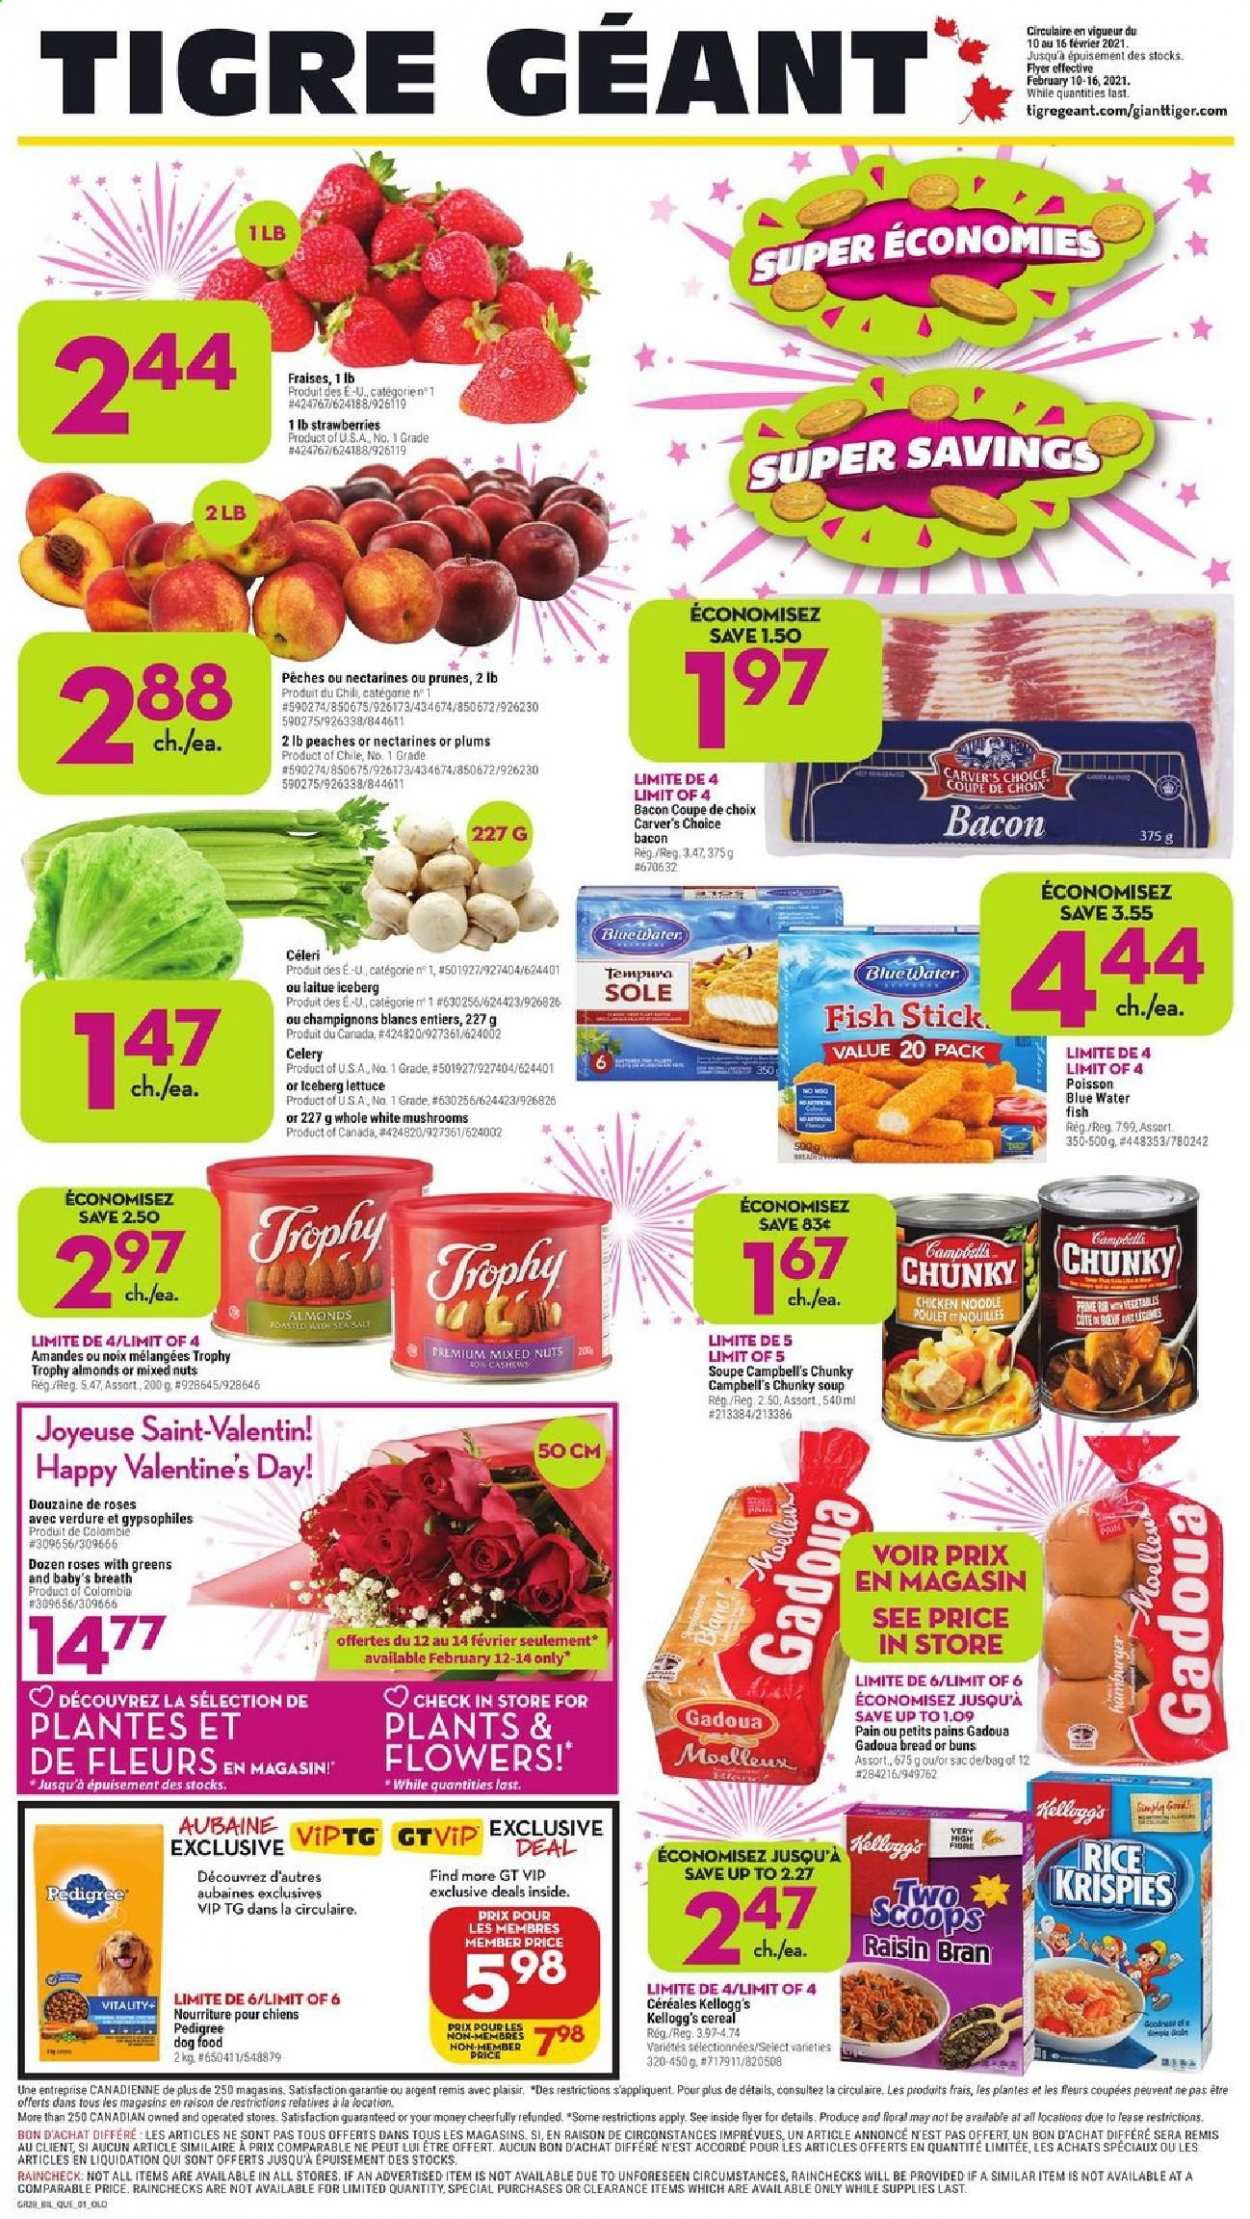 thumbnail - Giant Tiger Flyer - February 10, 2021 - February 16, 2021 - Sales products - mushrooms, bread, buns, celery, lettuce, nectarines, plums, peaches, fish, fish fingers, fish sticks, Campbell's, soup, noodles, bacon, Kellogg's, salt, cereals, Rice Krispies, Raisin Bran, almonds, prunes, mixed nuts, animal food, dog food, Pedigree, trophy cup, rose. Page 1.